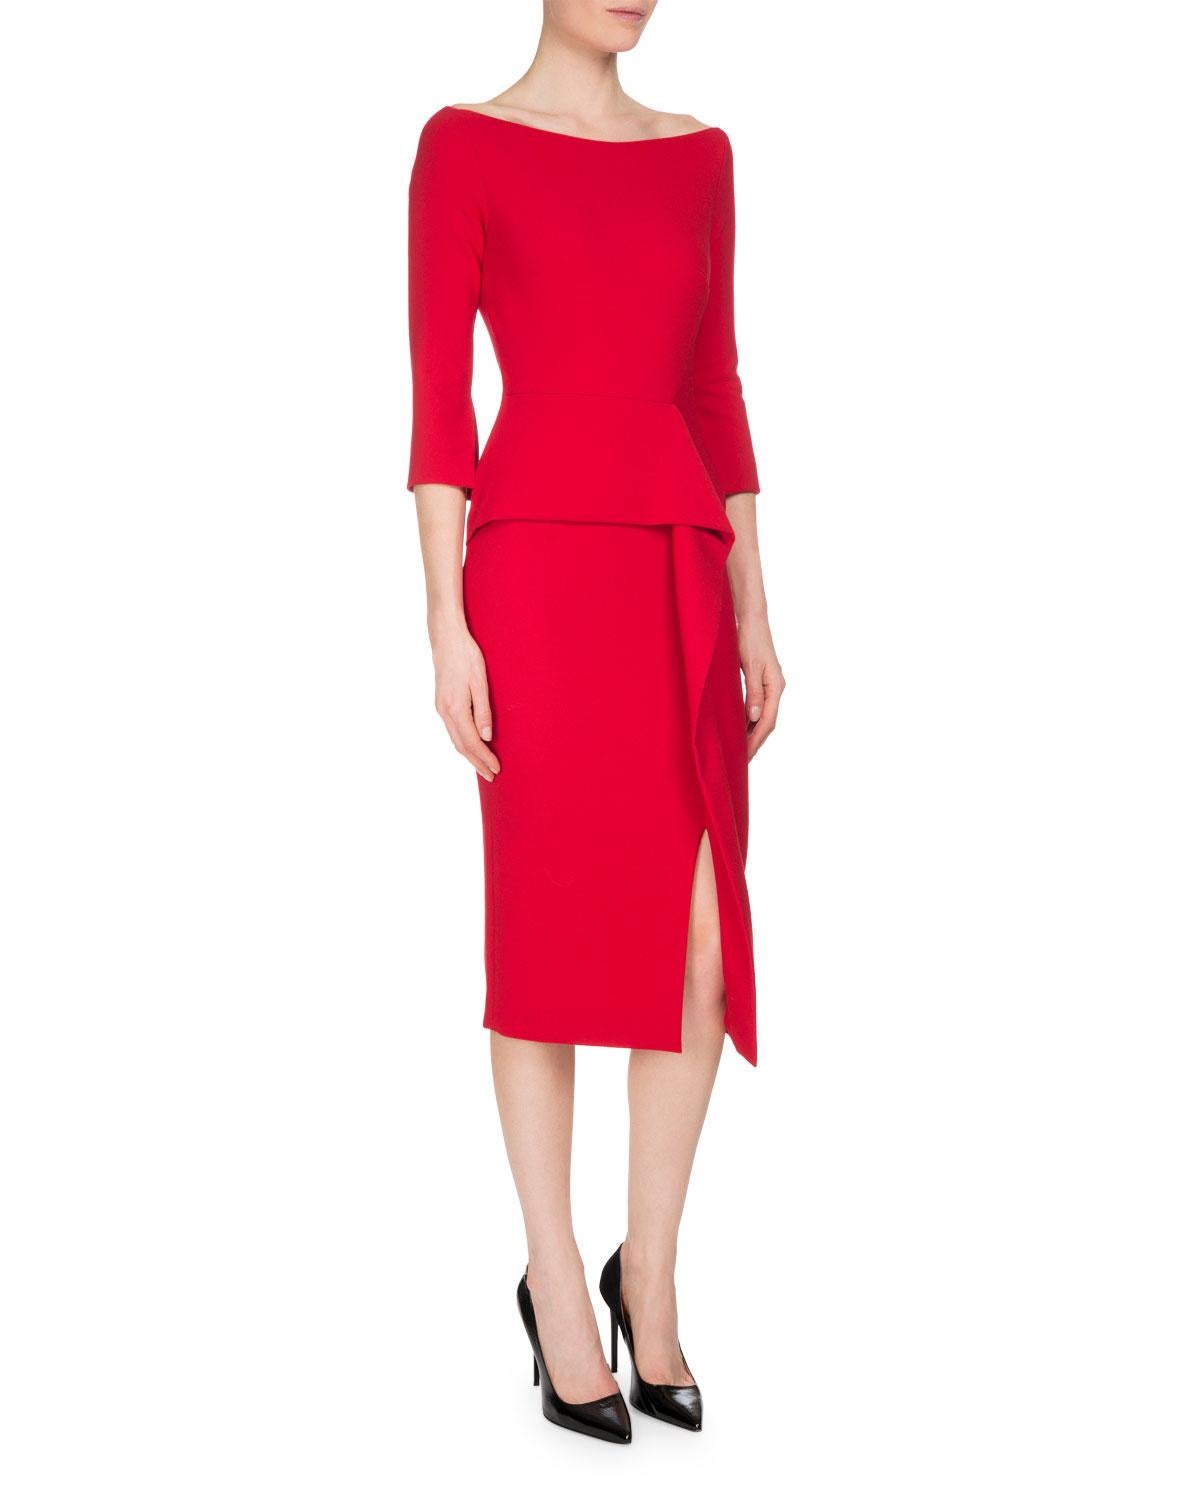 Roland Mouret NWT Red Ardingly Off-The-Shoulder Peplum Dress Sz 16

Made In:  Portugal  
Color: Red
Materials: 67% polyester, 29% viscose, 4% elastane
Lining: 68% acetate, 32% polyester
Opening/Closure: Exposed goldtone back zipper
Overall